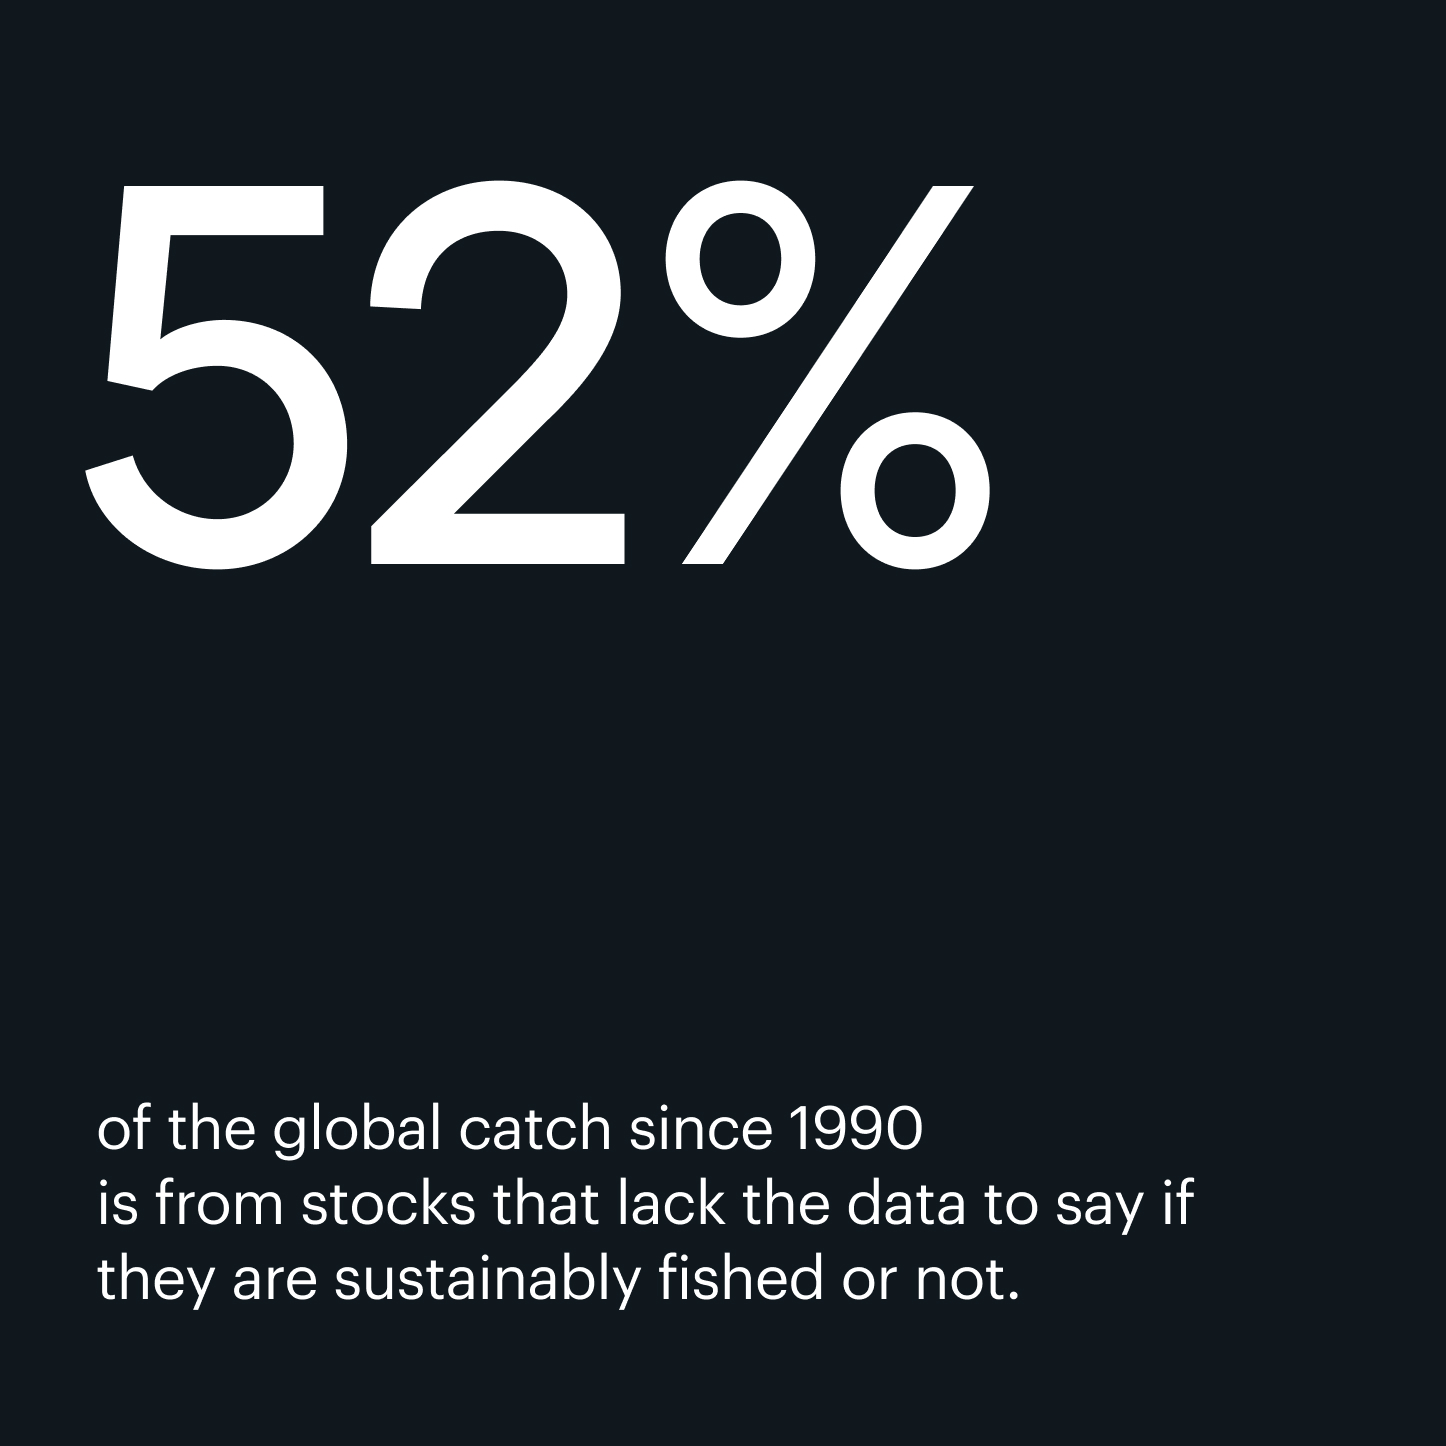 Black background with white copy that says, '52% of the global catch since 1990 is from stocks that lack the data to say if they are sustainably fished or not.